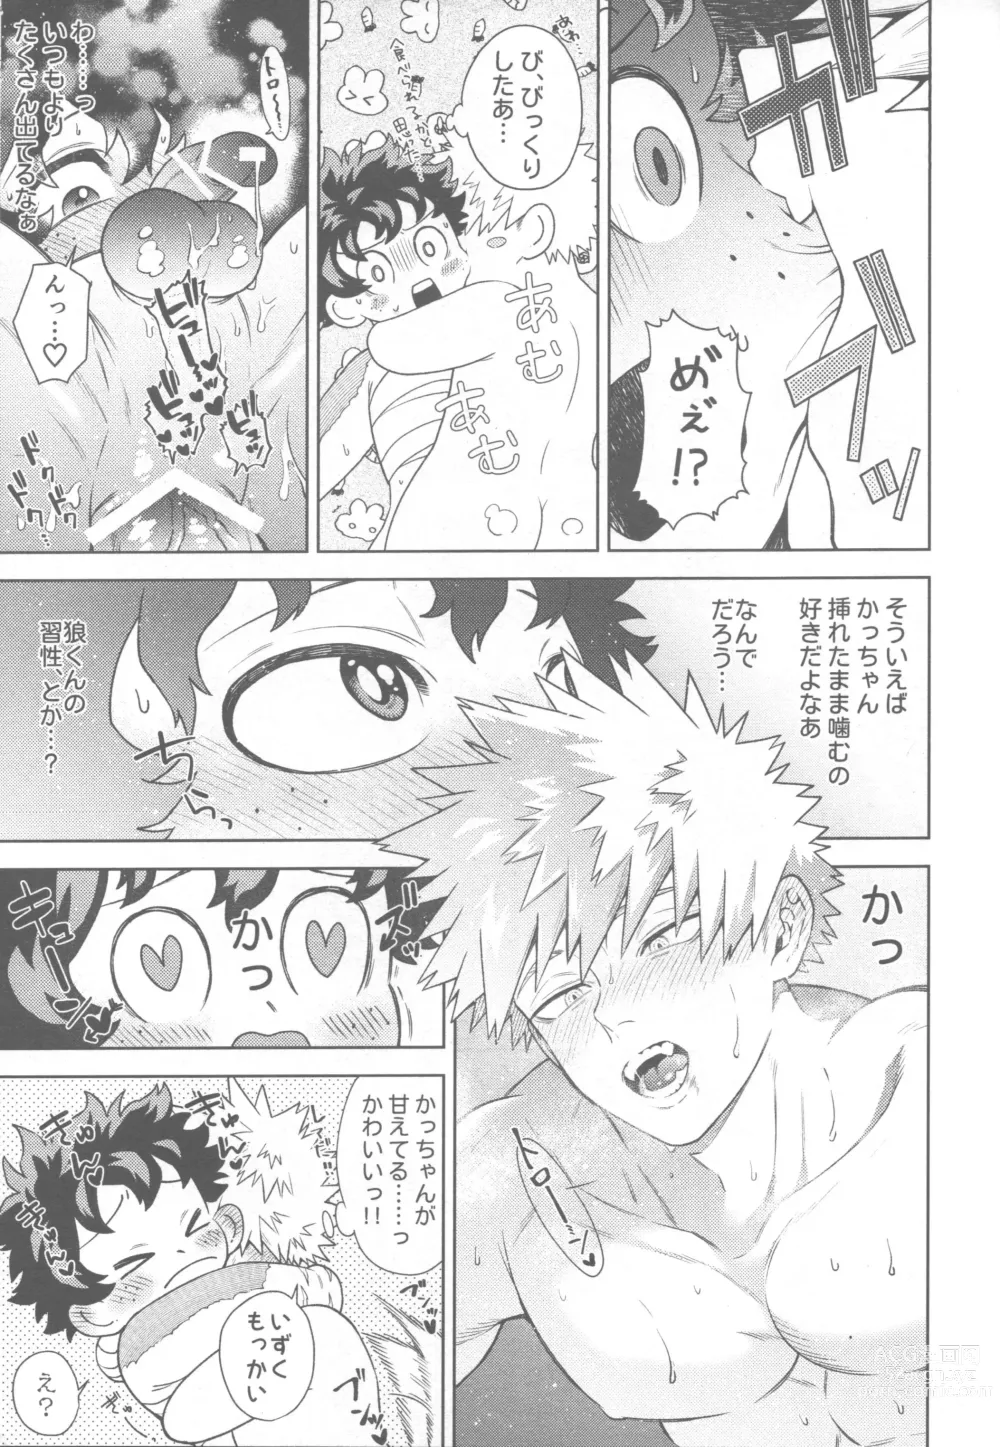 Page 21 of doujinshi SNOW TALE